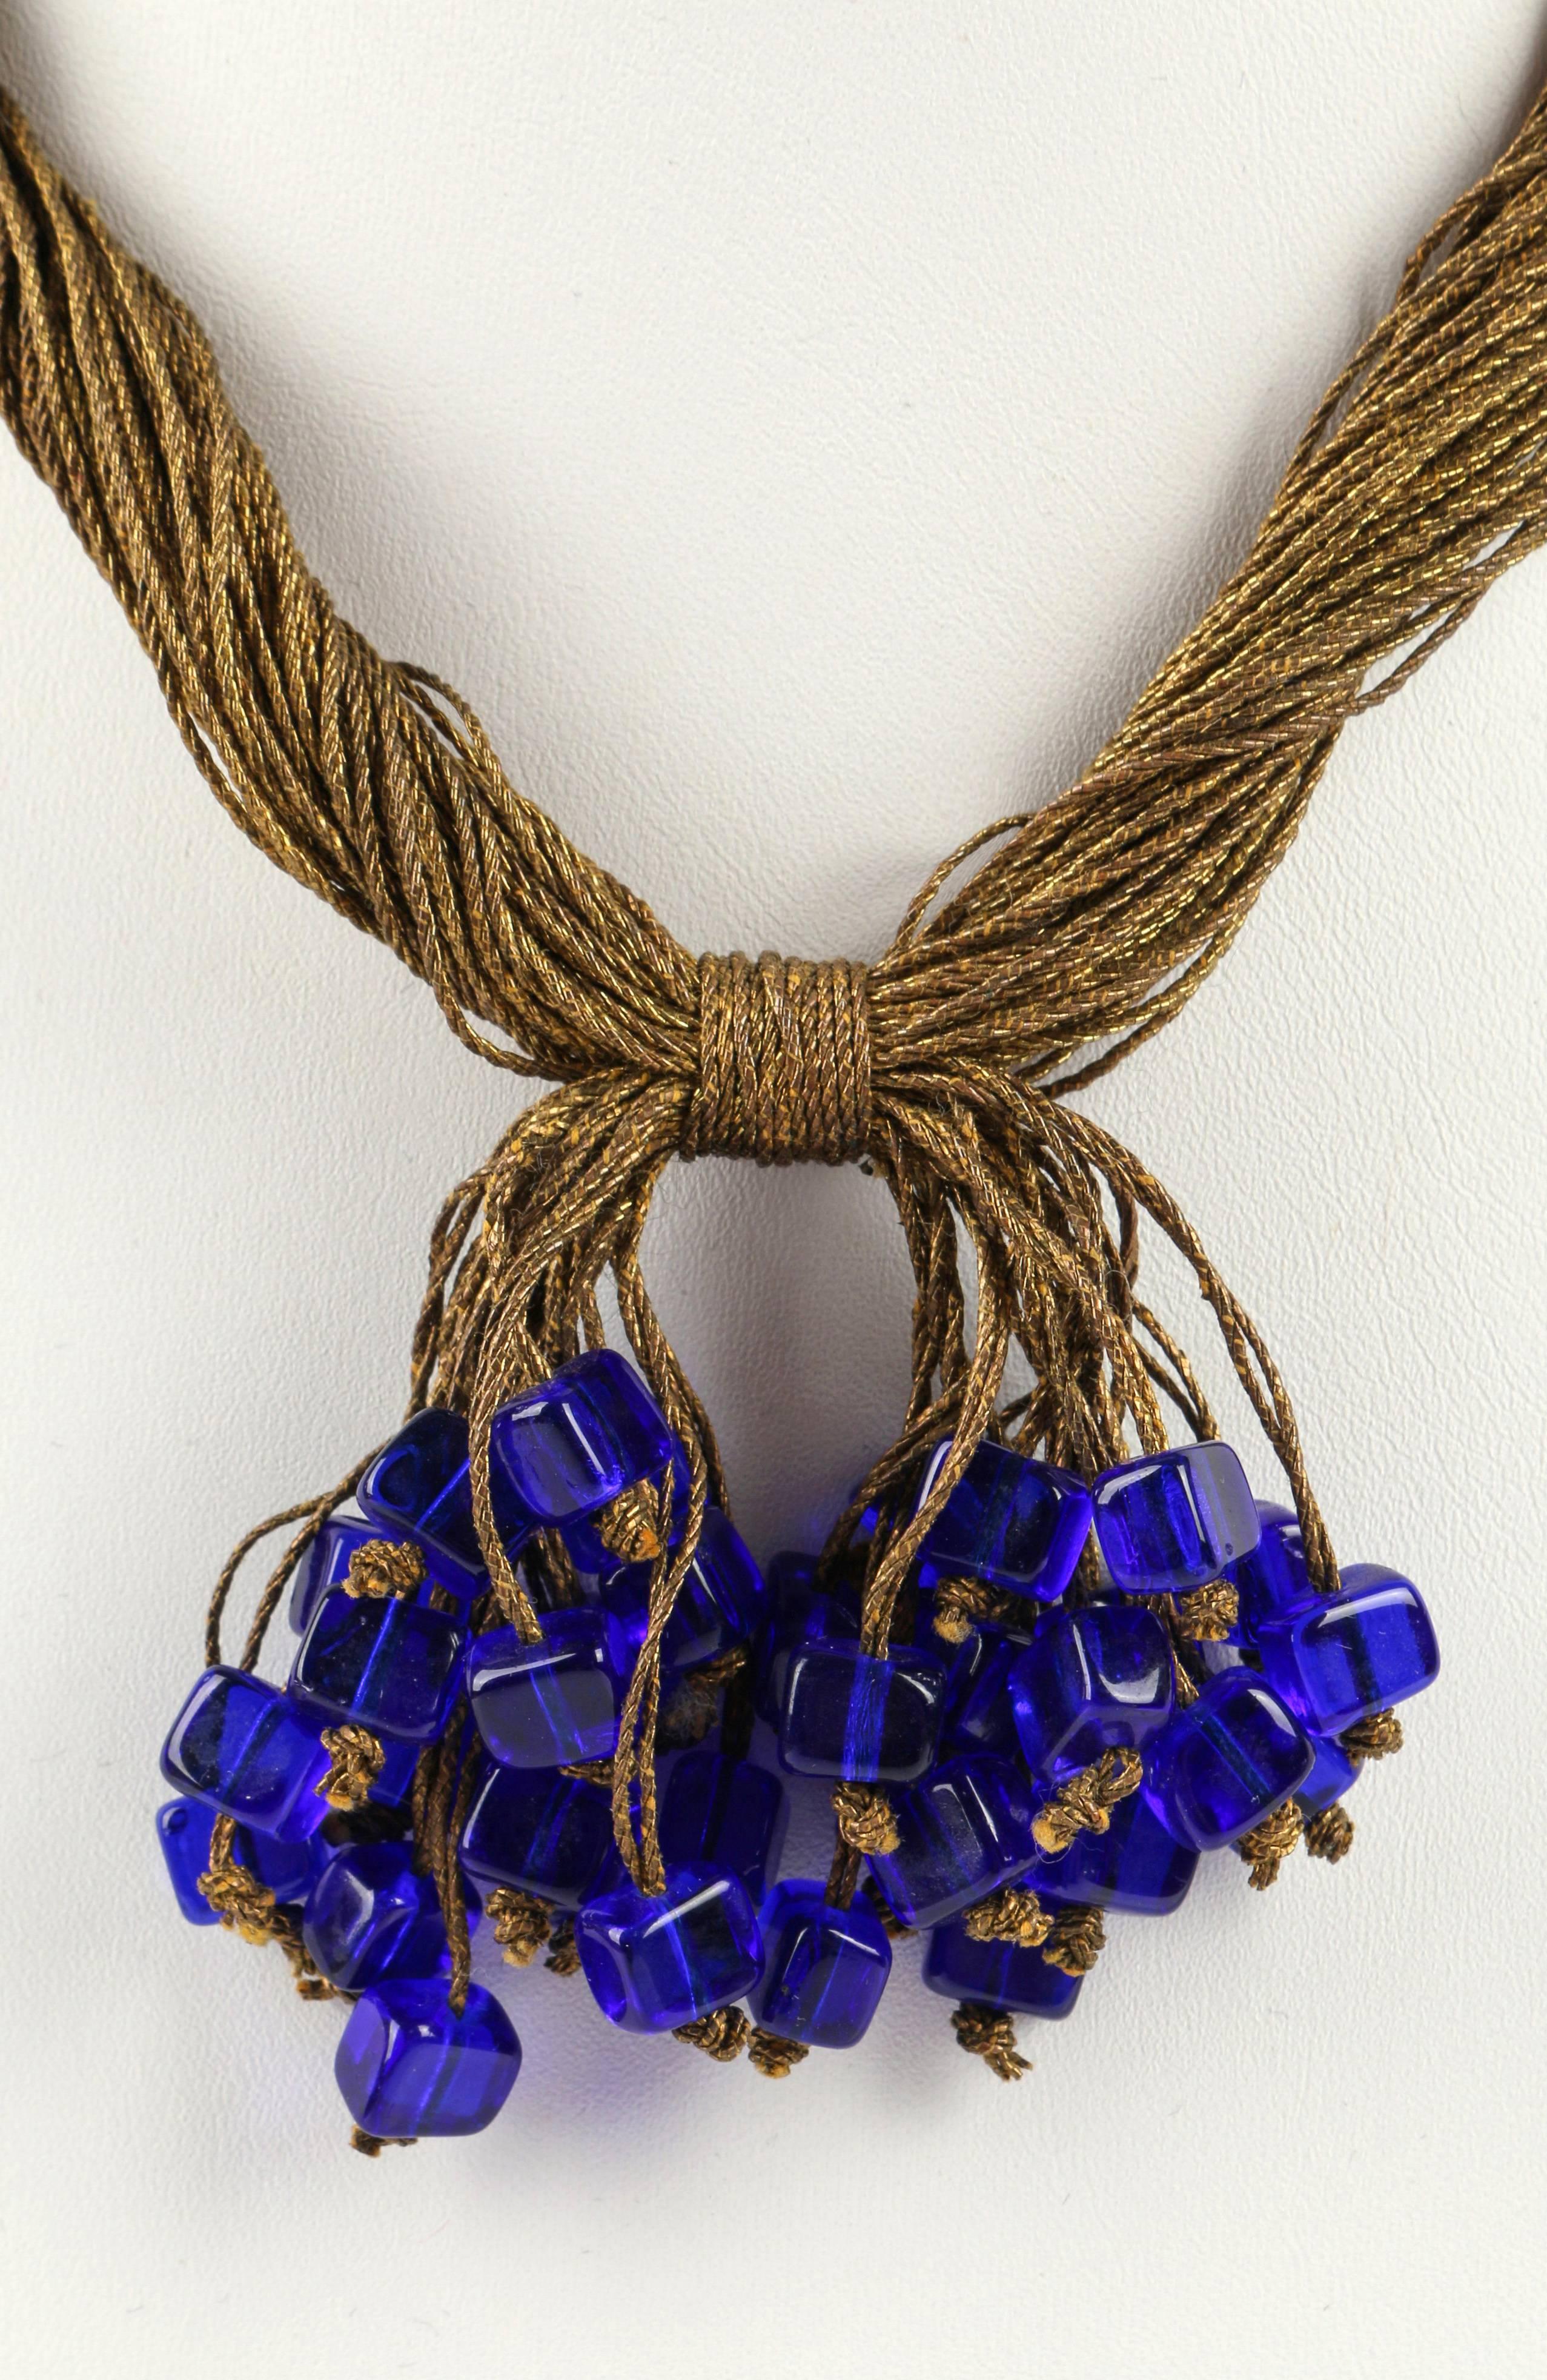 Vintage c.1920's antique gold toned bullion tassel and multi thread necklace with cobalt glass bead dangles. Necklace is made of several twisted bullion threads (fine brass tone metal wrapped thread). Threads bound at center front of necklace to